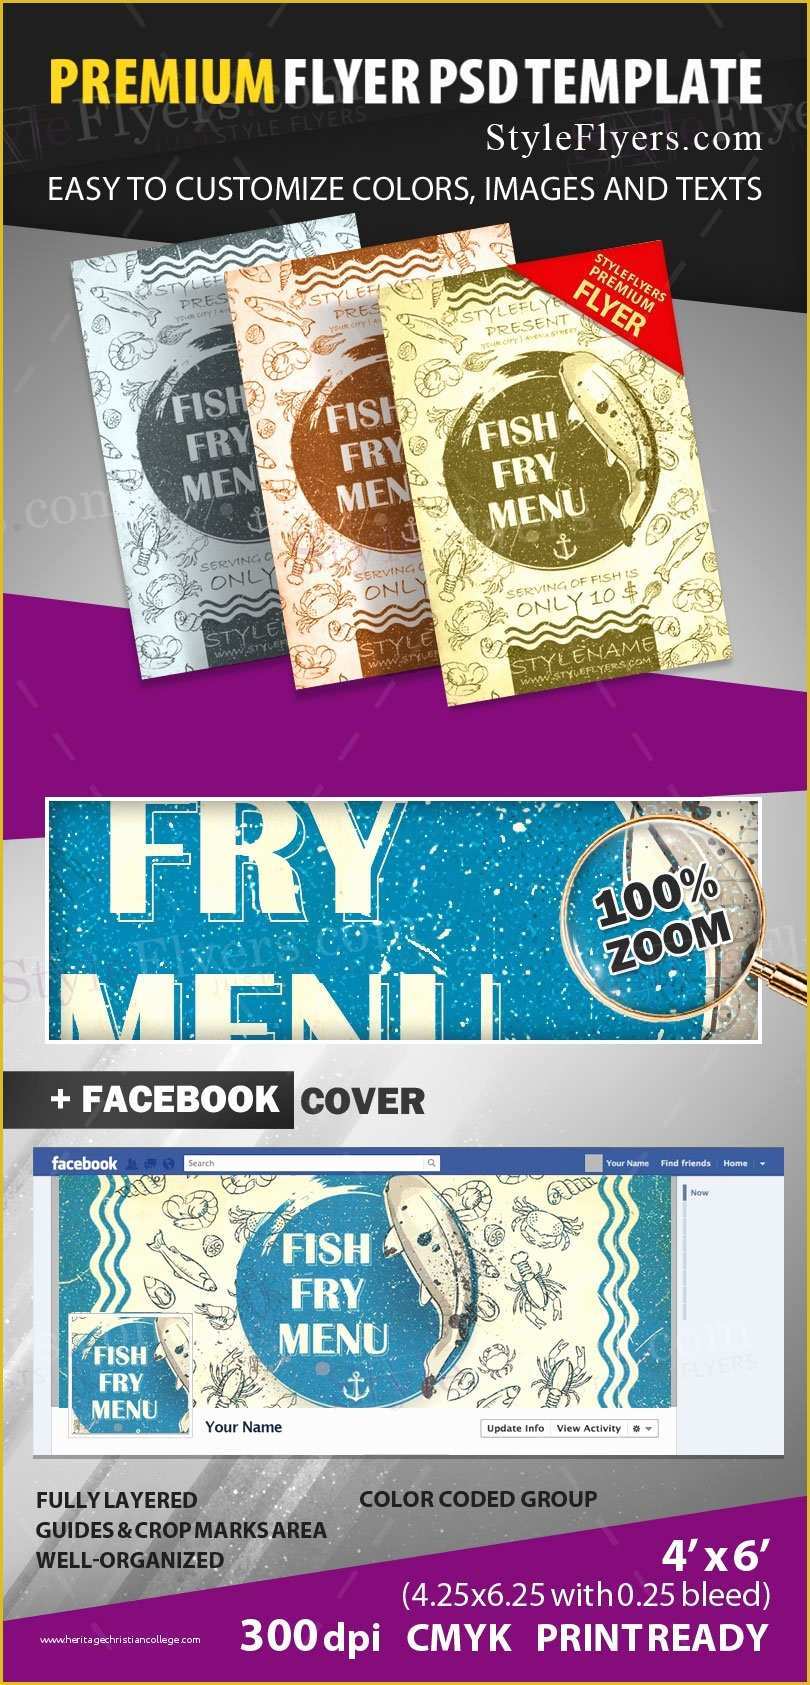 Free Fish Fry Flyer Template Of Fish Fry Menu Psd Flyer Template Styleflyers